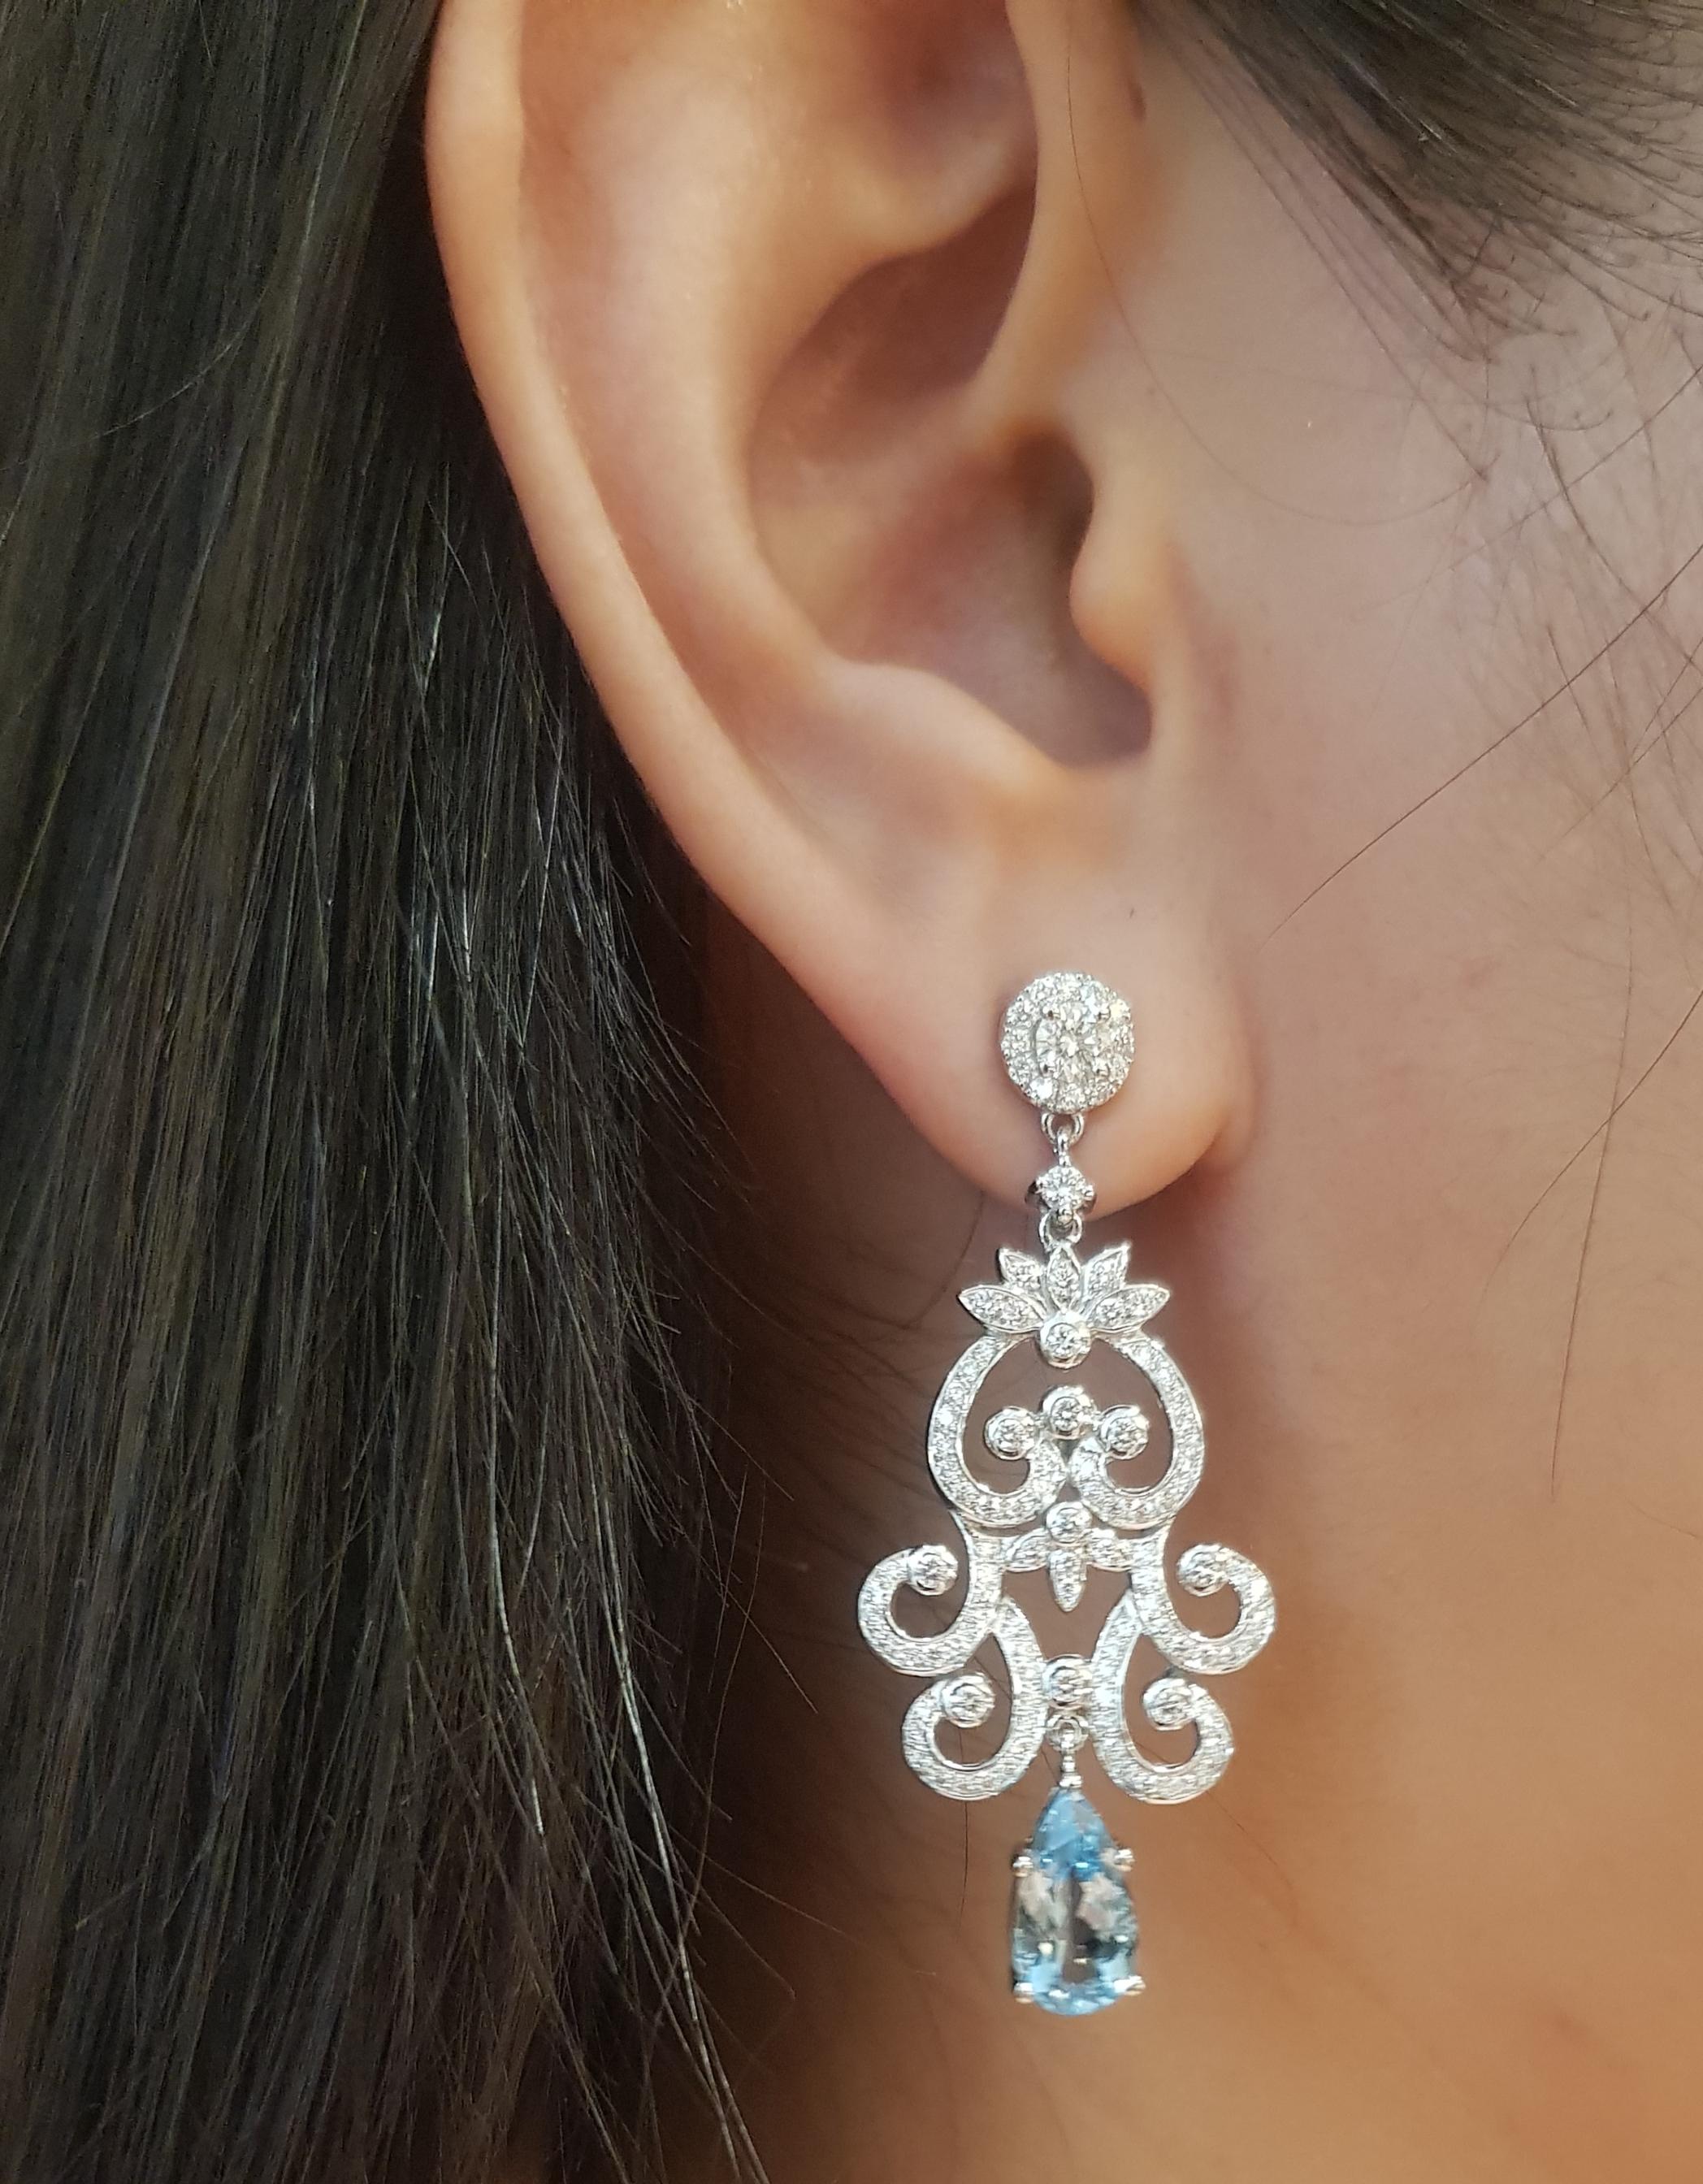 Aquamarine 3.17 carats with Diamond 1.56 carats Earrings set in 18K White Gold Settings

Width:  2.0 cm 
Length: 4.9 cm
Total Weight: 17.14 grams


